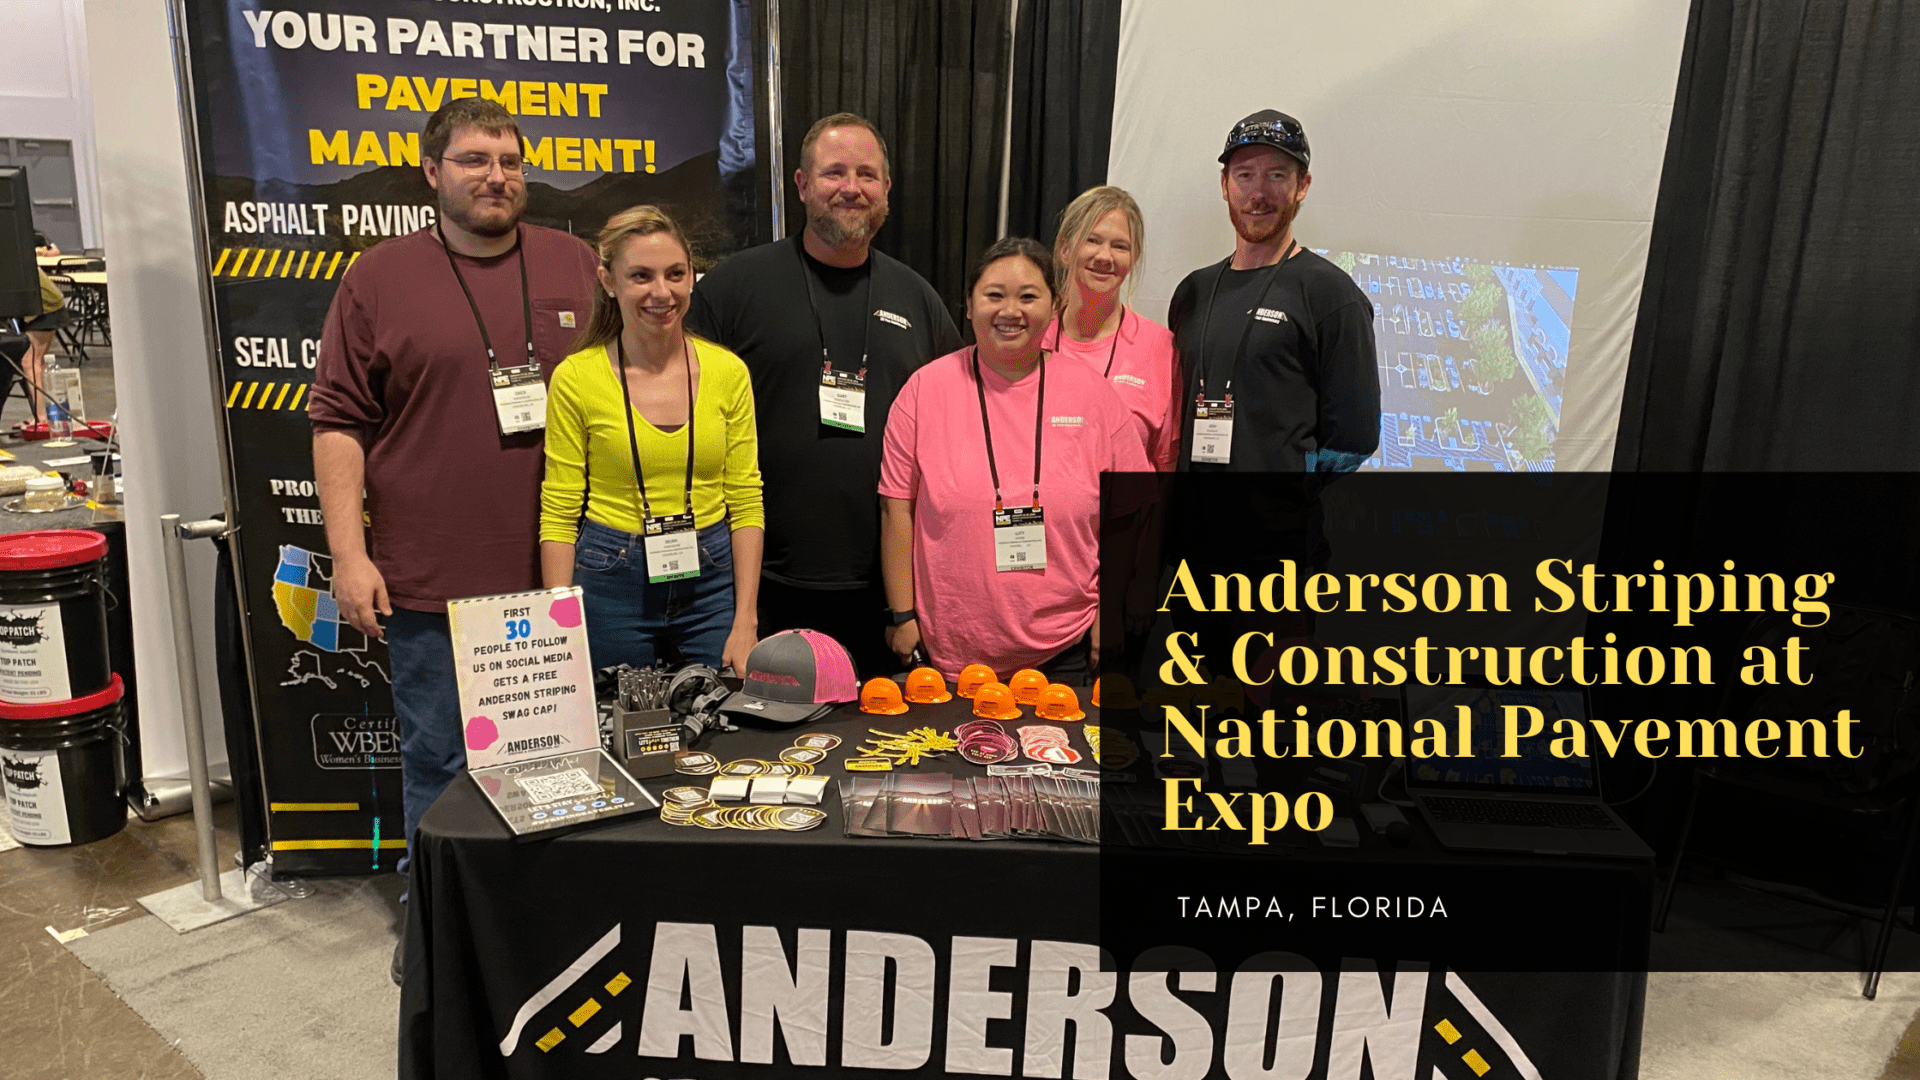 Anderson Striping & Construction at National Pavement Expo